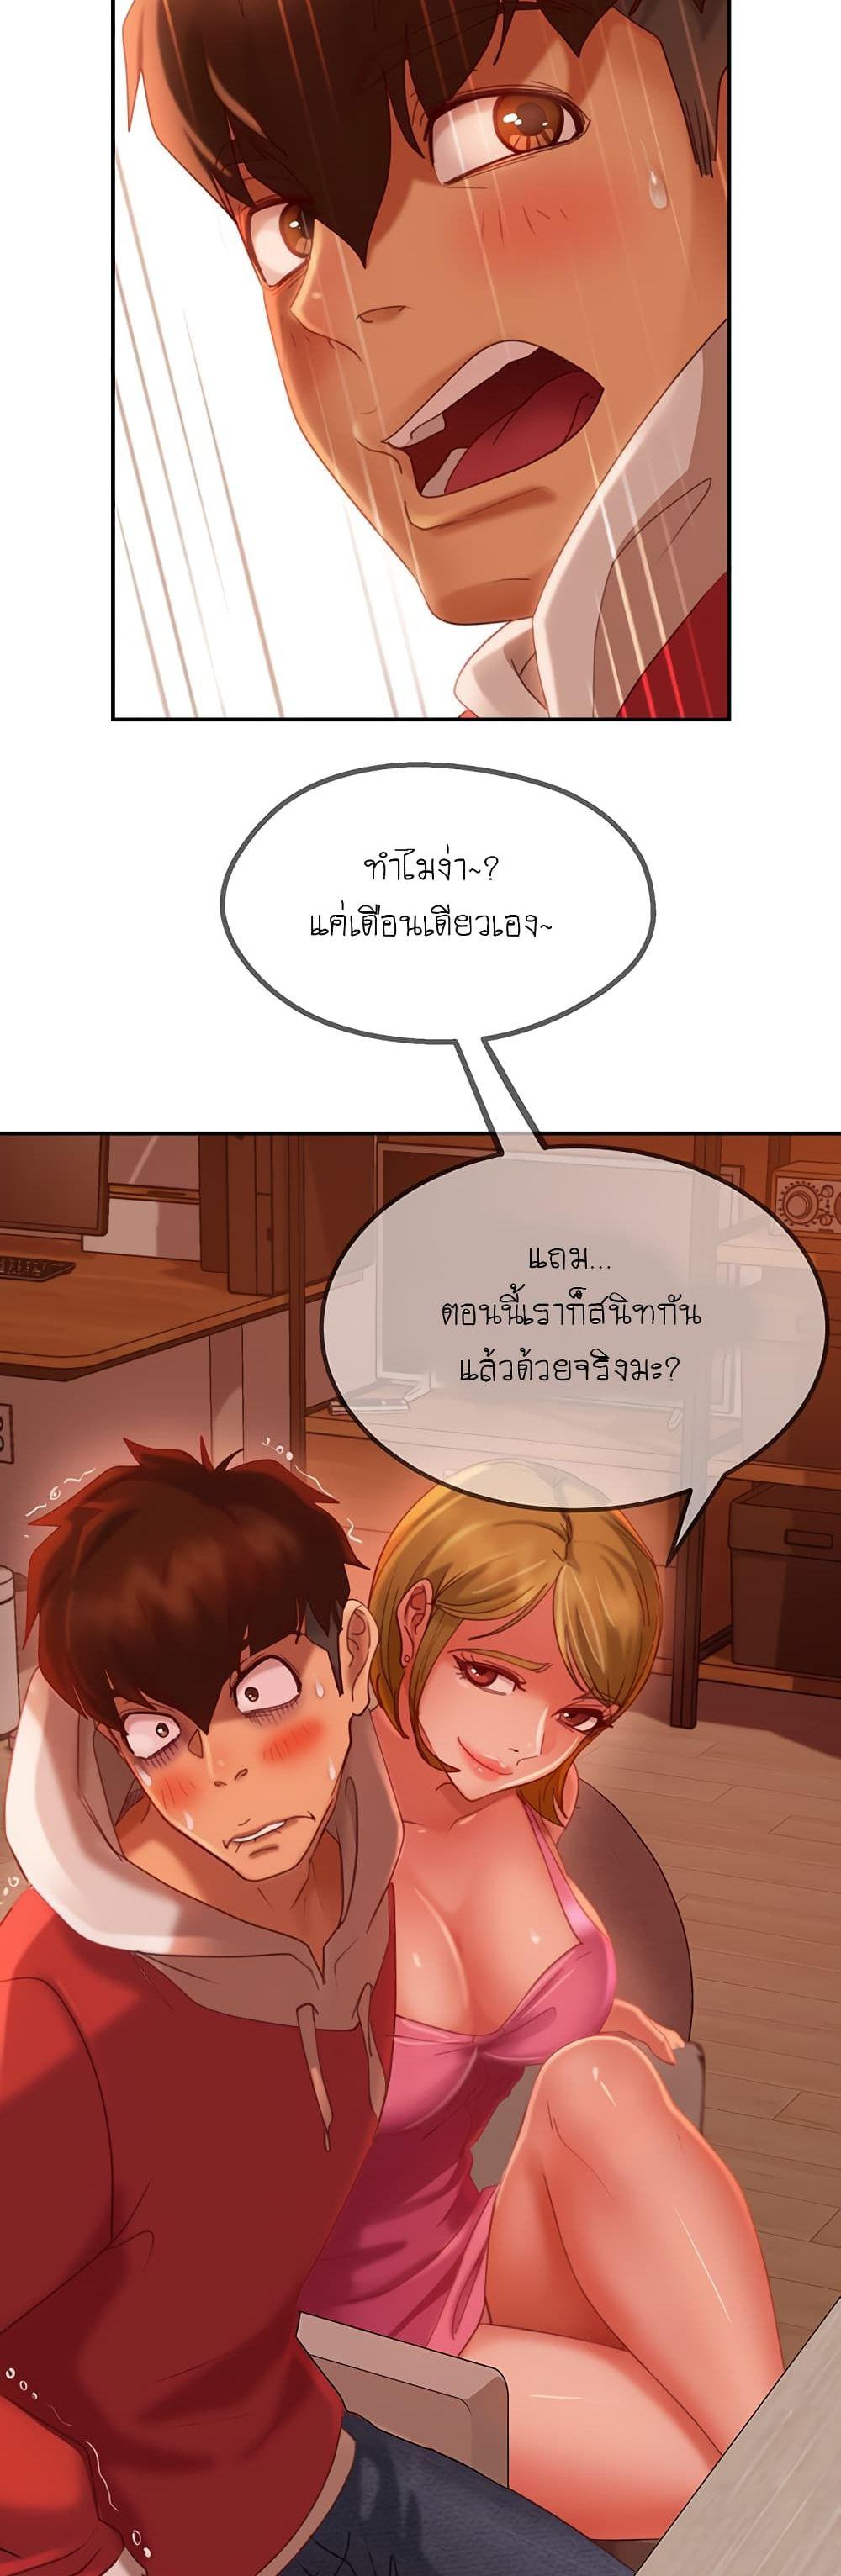 A Twisted Day 4 ภาพ 20